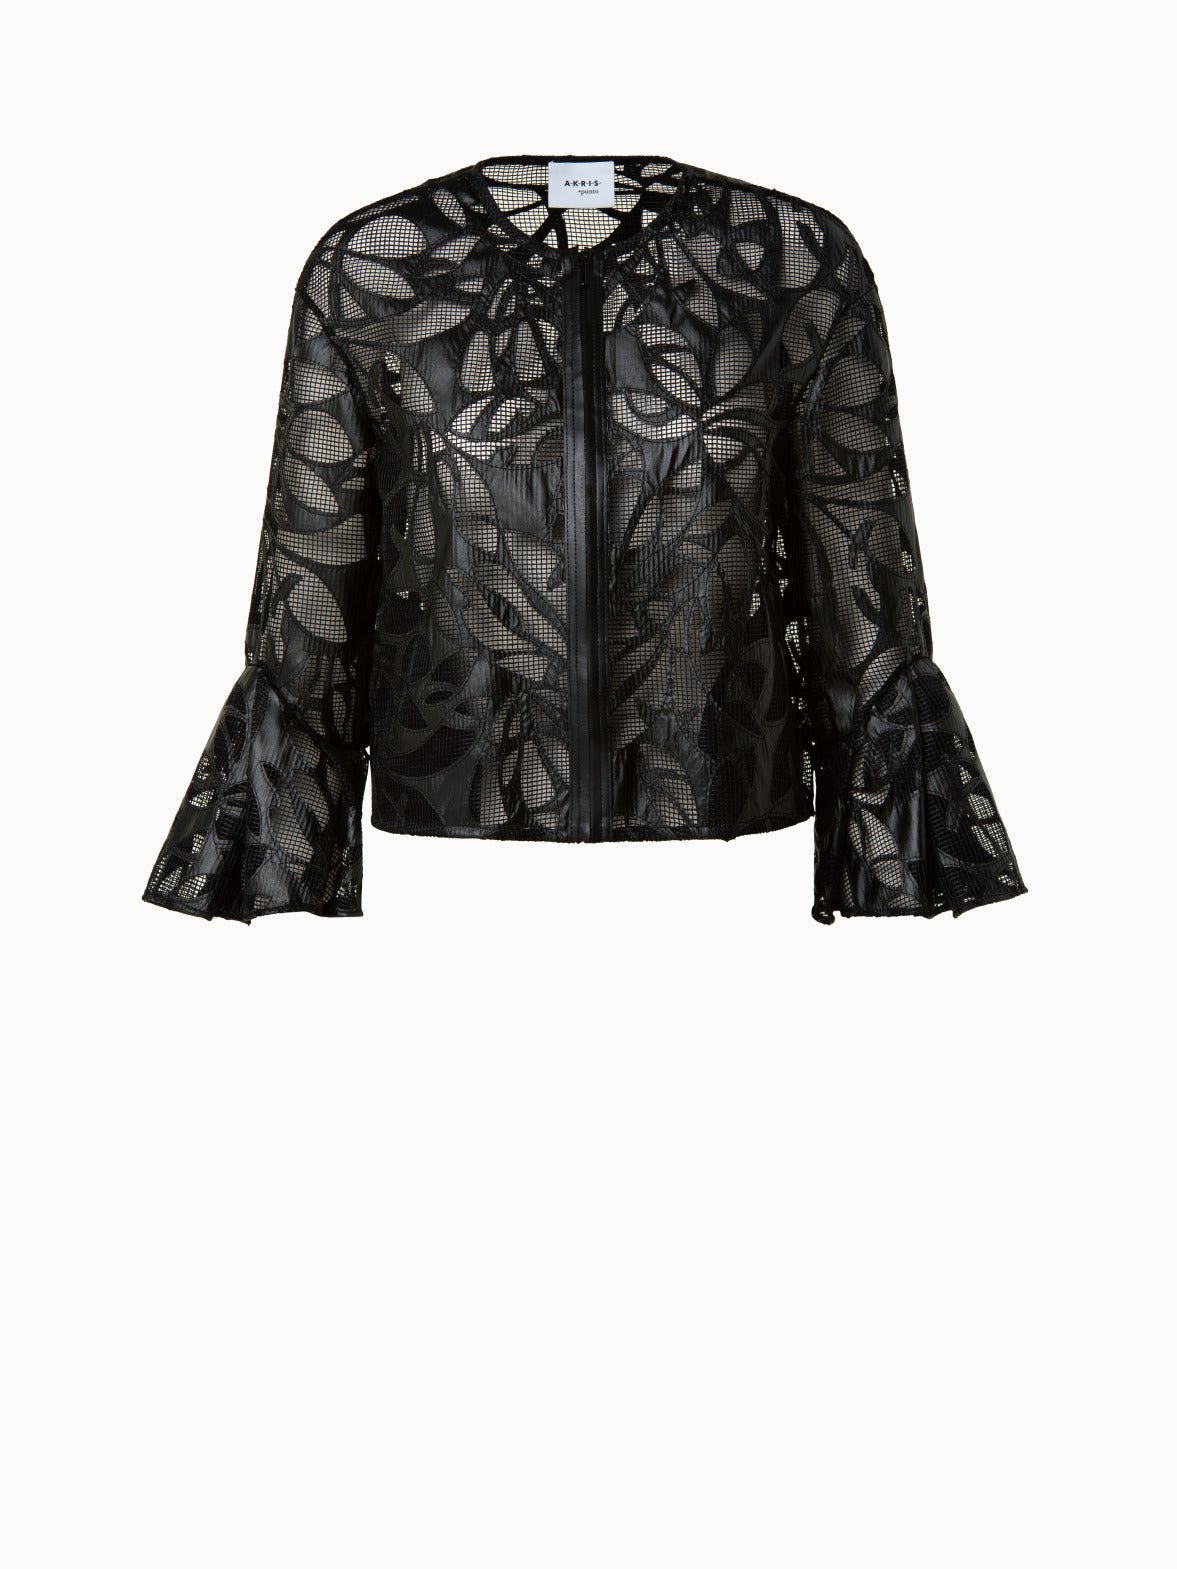 Boxy Jacket in Vegan Leather Leaves Cutouts on Techno Mesh